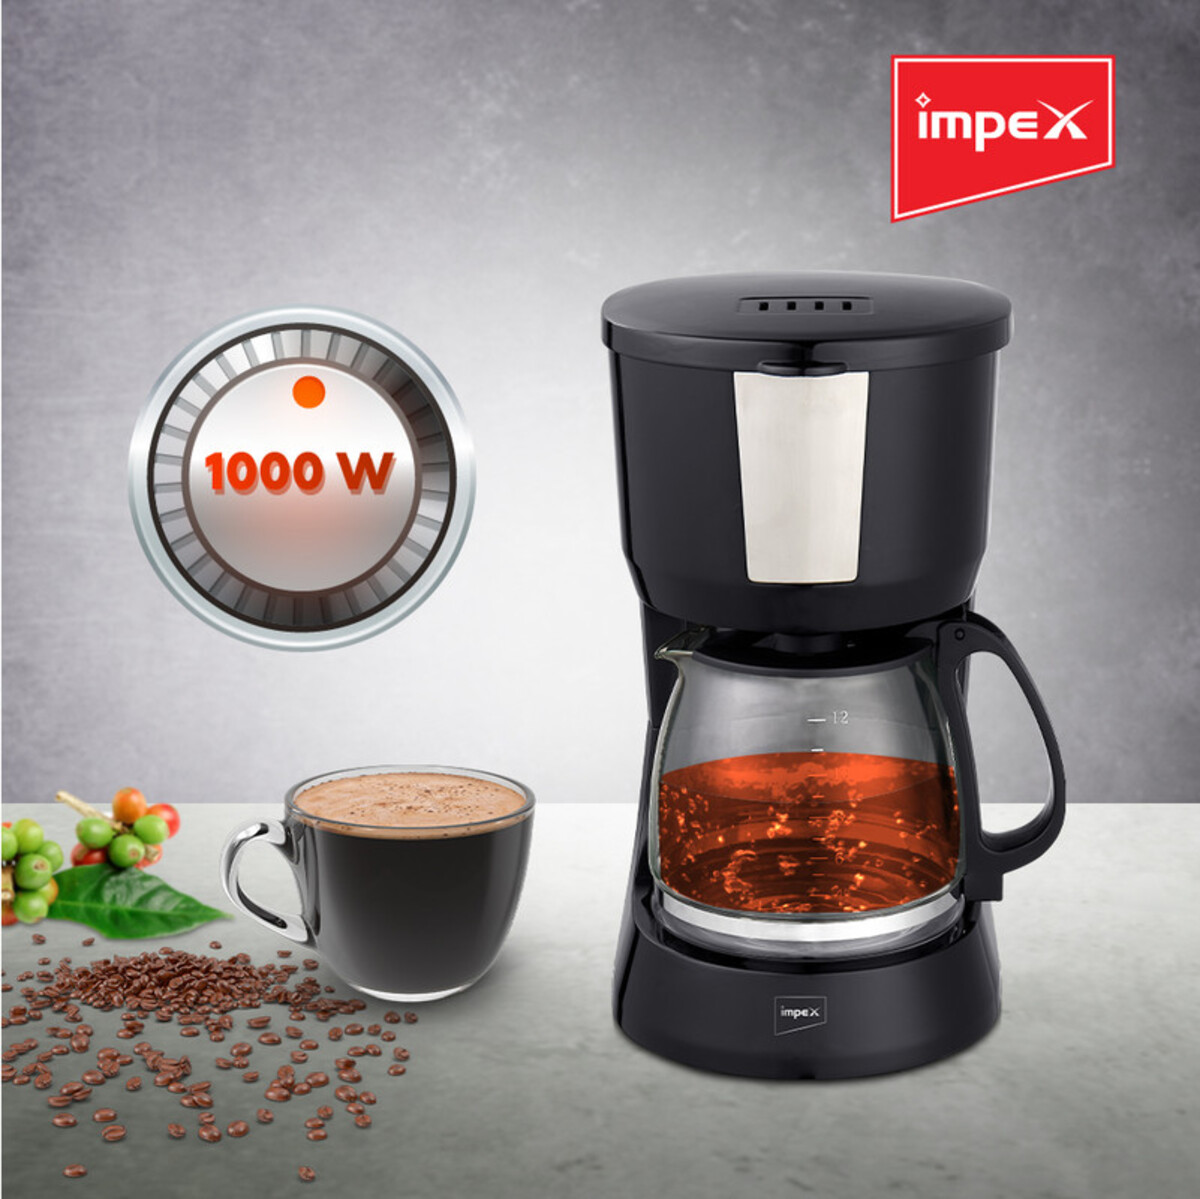 Impex Cm 1915 1000 Watts Drip Coffee Maker Featuring Anti-drip Function